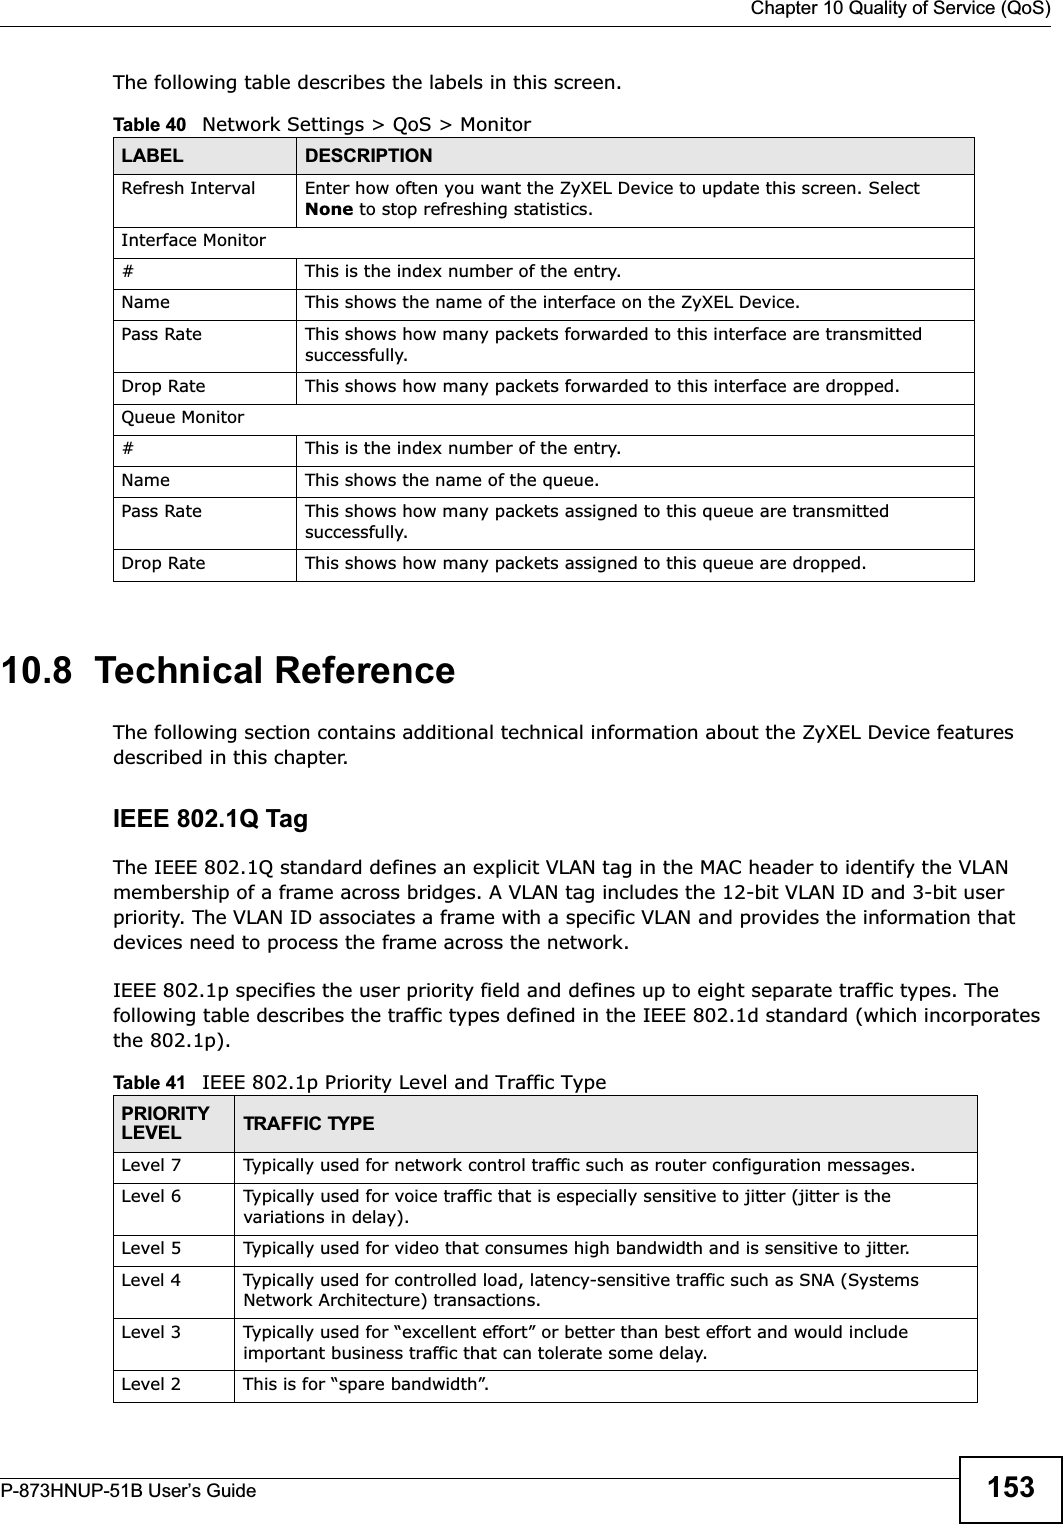  Chapter 10 Quality of Service (QoS)P-873HNUP-51B User’s Guide 153The following table describes the labels in this screen.  10.8  Technical ReferenceThe following section contains additional technical information about the ZyXEL Device features described in this chapter.IEEE 802.1Q TagThe IEEE 802.1Q standard defines an explicit VLAN tag in the MAC header to identify the VLAN membership of a frame across bridges. A VLAN tag includes the 12-bit VLAN ID and 3-bit user priority. The VLAN ID associates a frame with a specific VLAN and provides the information that devices need to process the frame across the network. IEEE 802.1p specifies the user priority field and defines up to eight separate traffic types. The following table describes the traffic types defined in the IEEE 802.1d standard (which incorporates the 802.1p).  Table 40   Network Settings &gt; QoS &gt; MonitorLABEL DESCRIPTIONRefresh Interval Enter how often you want the ZyXEL Device to update this screen. Select None to stop refreshing statistics.Interface Monitor# This is the index number of the entry.Name This shows the name of the interface on the ZyXEL Device. Pass Rate This shows how many packets forwarded to this interface are transmitted successfully.Drop Rate This shows how many packets forwarded to this interface are dropped.Queue Monitor# This is the index number of the entry.Name This shows the name of the queue. Pass Rate This shows how many packets assigned to this queue are transmitted successfully.Drop Rate This shows how many packets assigned to this queue are dropped.Table 41   IEEE 802.1p Priority Level and Traffic TypePRIORITYLEVEL TRAFFIC TYPELevel 7 Typically used for network control traffic such as router configuration messages.Level 6 Typically used for voice traffic that is especially sensitive to jitter (jitter is the variations in delay).Level 5 Typically used for video that consumes high bandwidth and is sensitive to jitter.Level 4 Typically used for controlled load, latency-sensitive traffic such as SNA (Systems Network Architecture) transactions.Level 3 Typically used for “excellent effort” or better than best effort and would include important business traffic that can tolerate some delay.Level 2 This is for “spare bandwidth”. 